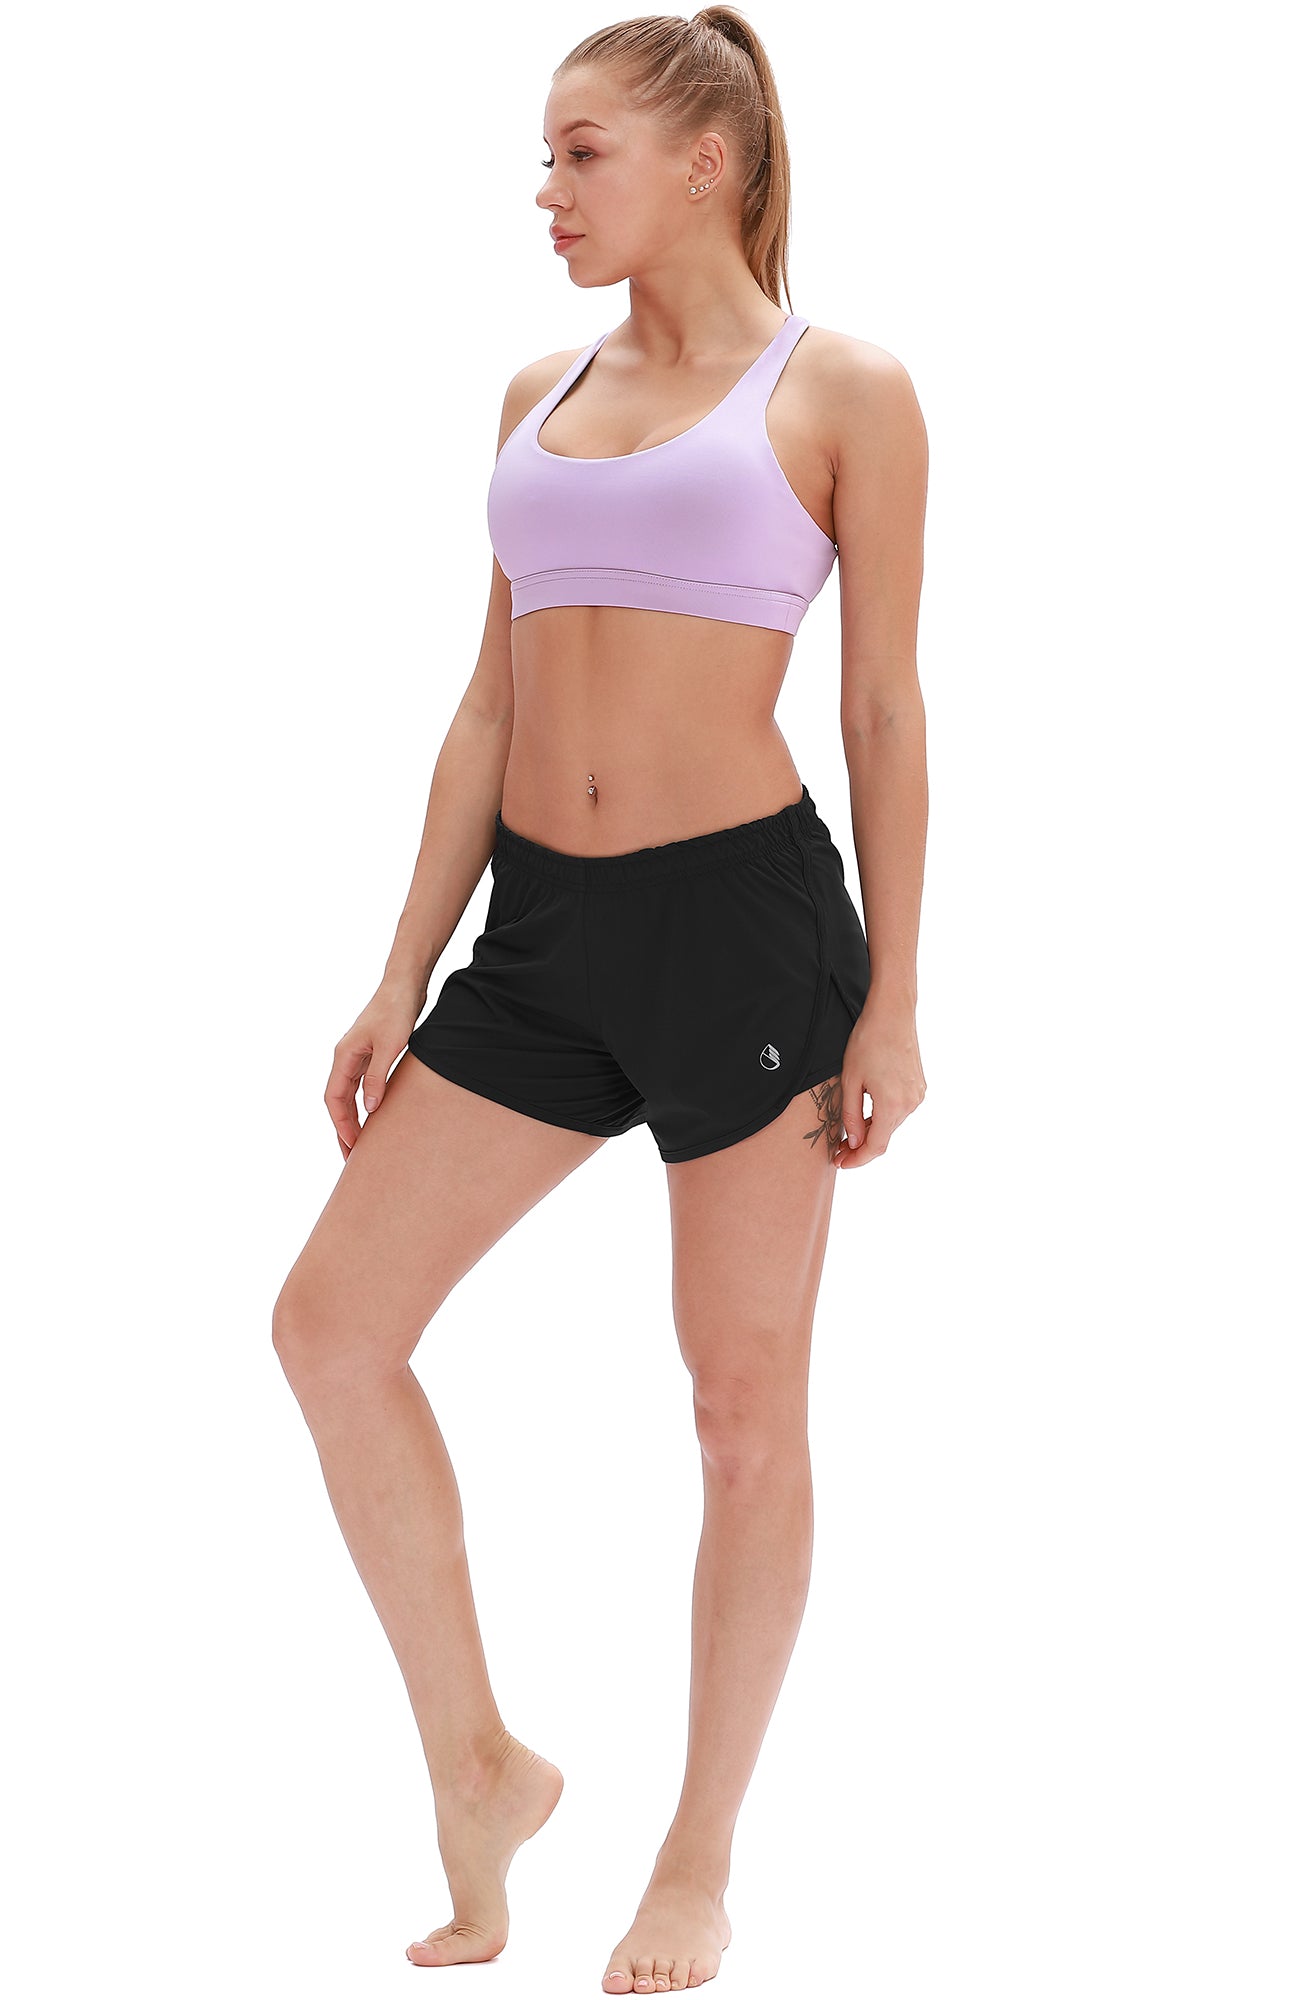 icyzone Workout Shorts Built-in Brief - Women's Gym Exercise Athletic  Running Yoga Shorts (M, Black) at  Women's Clothing store